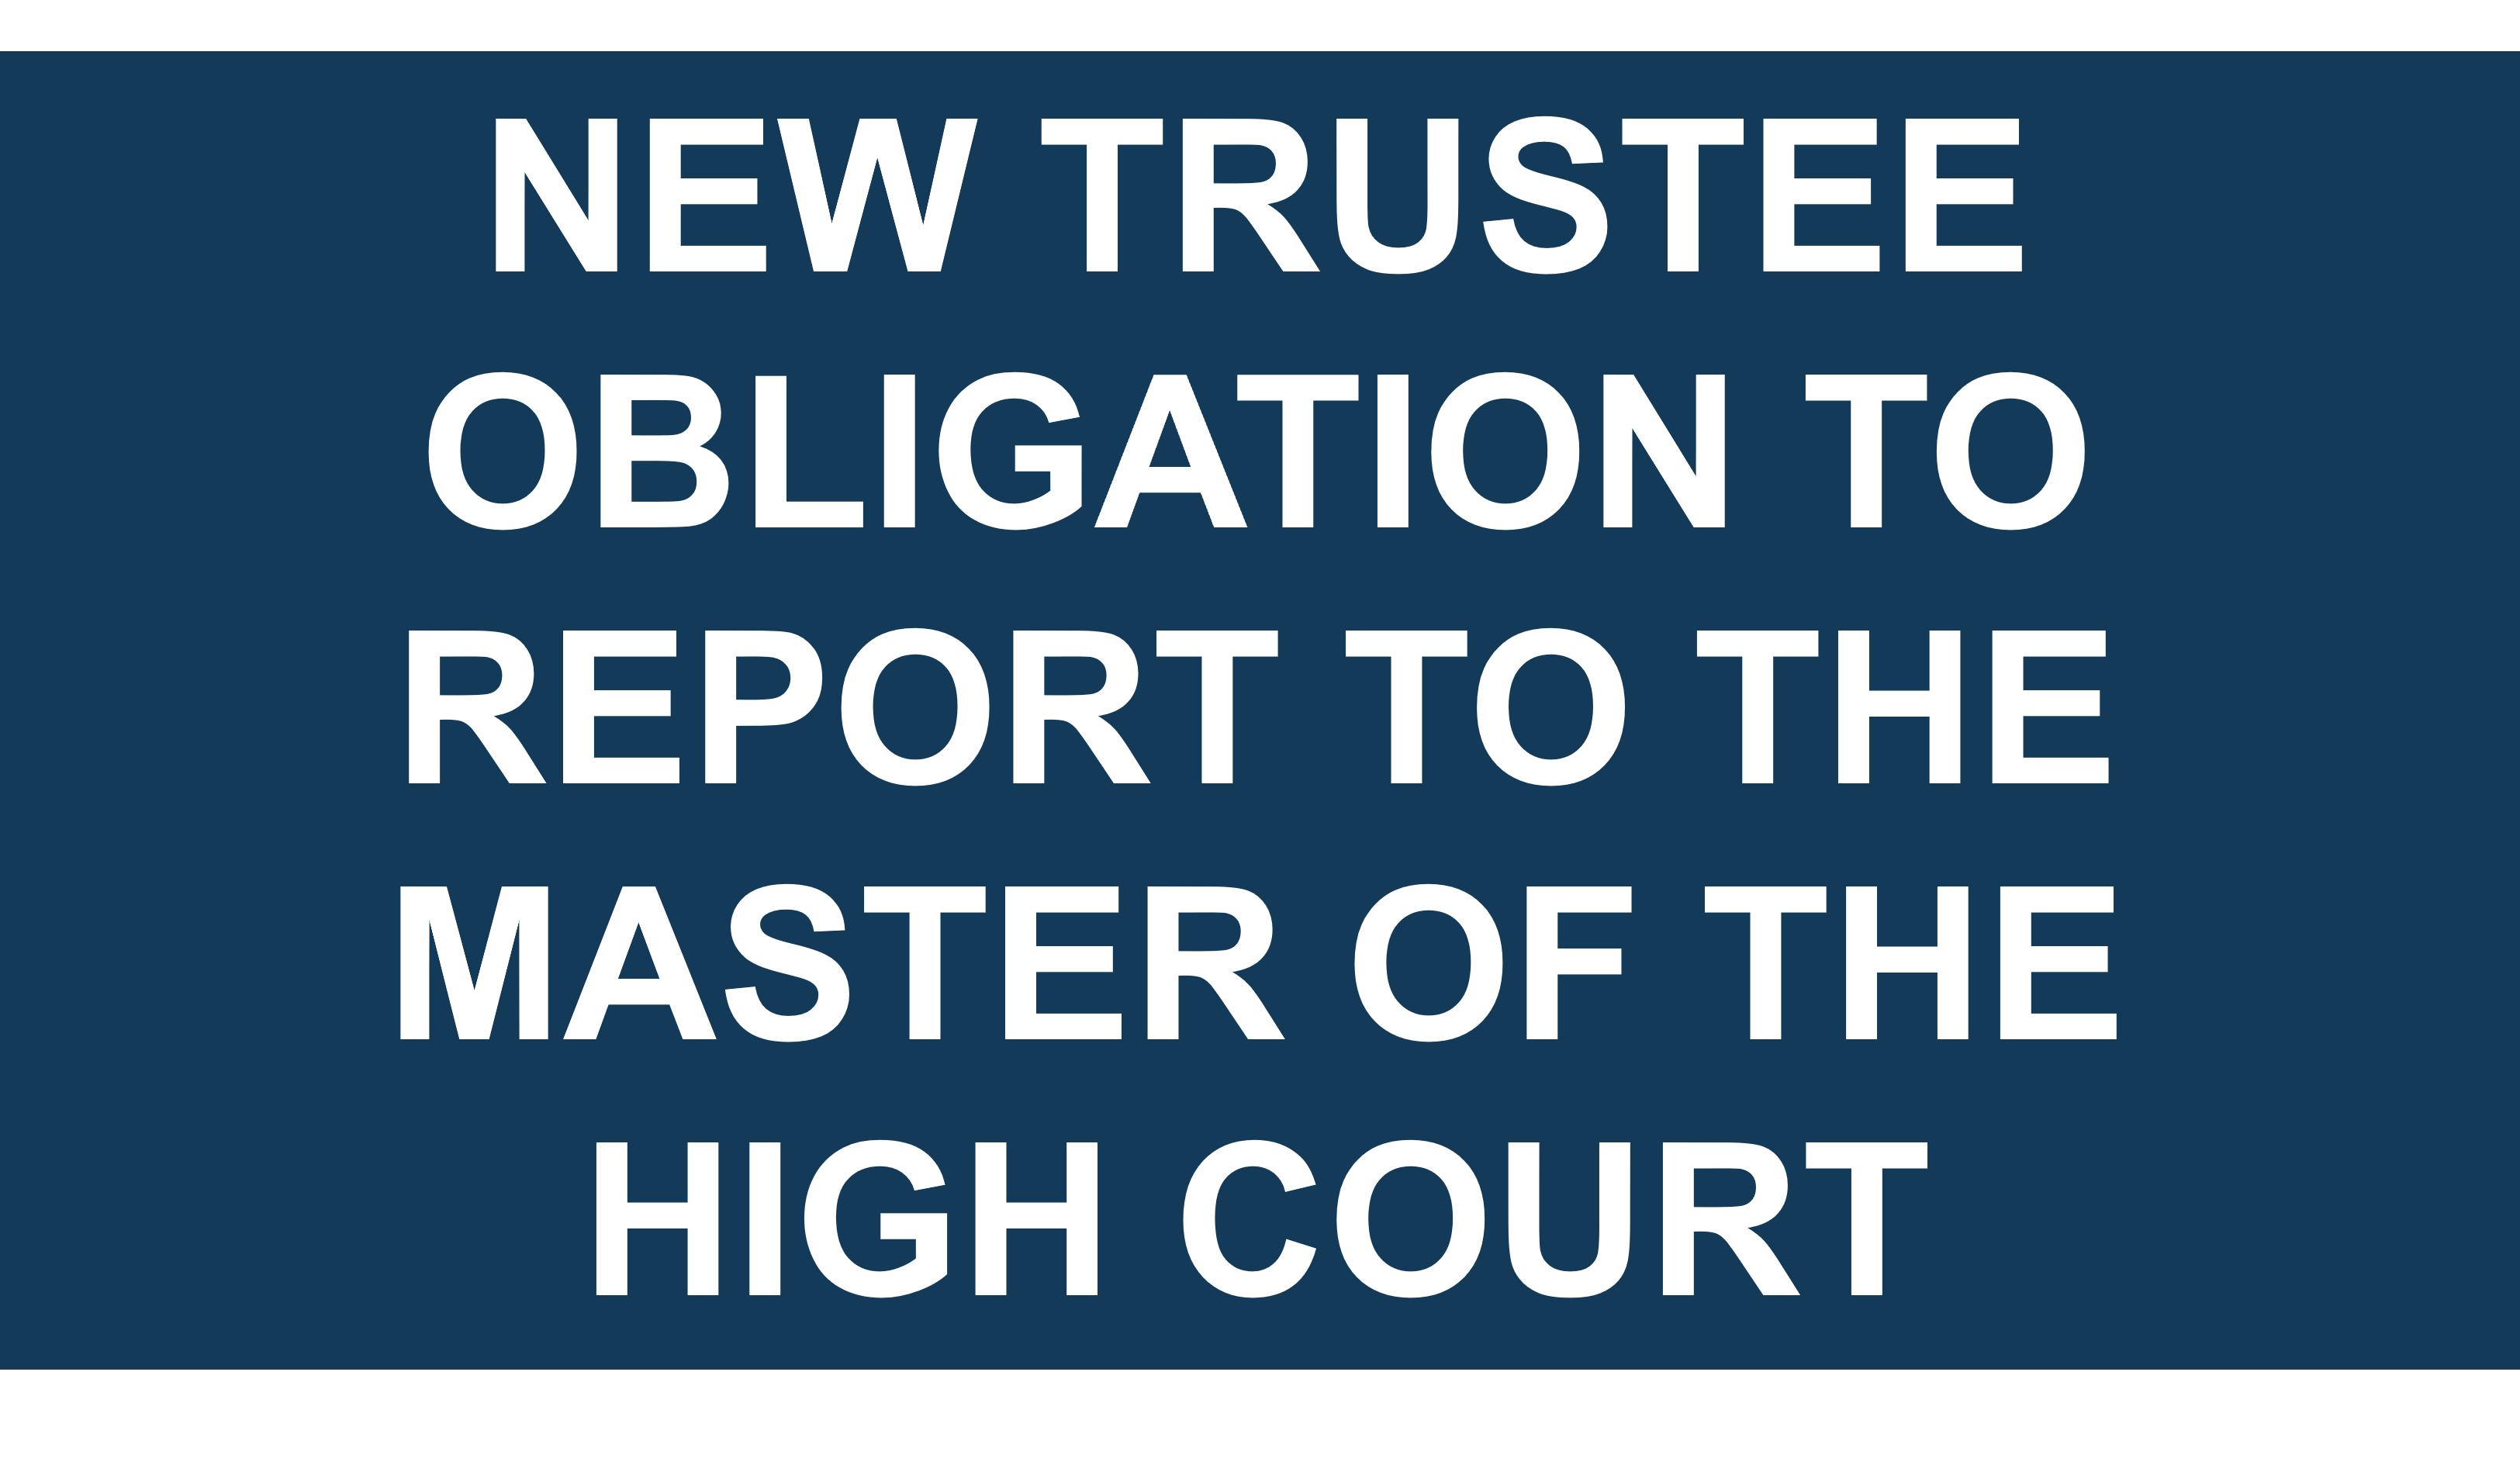 New Trustee Obligation to report to the Master of the High Court